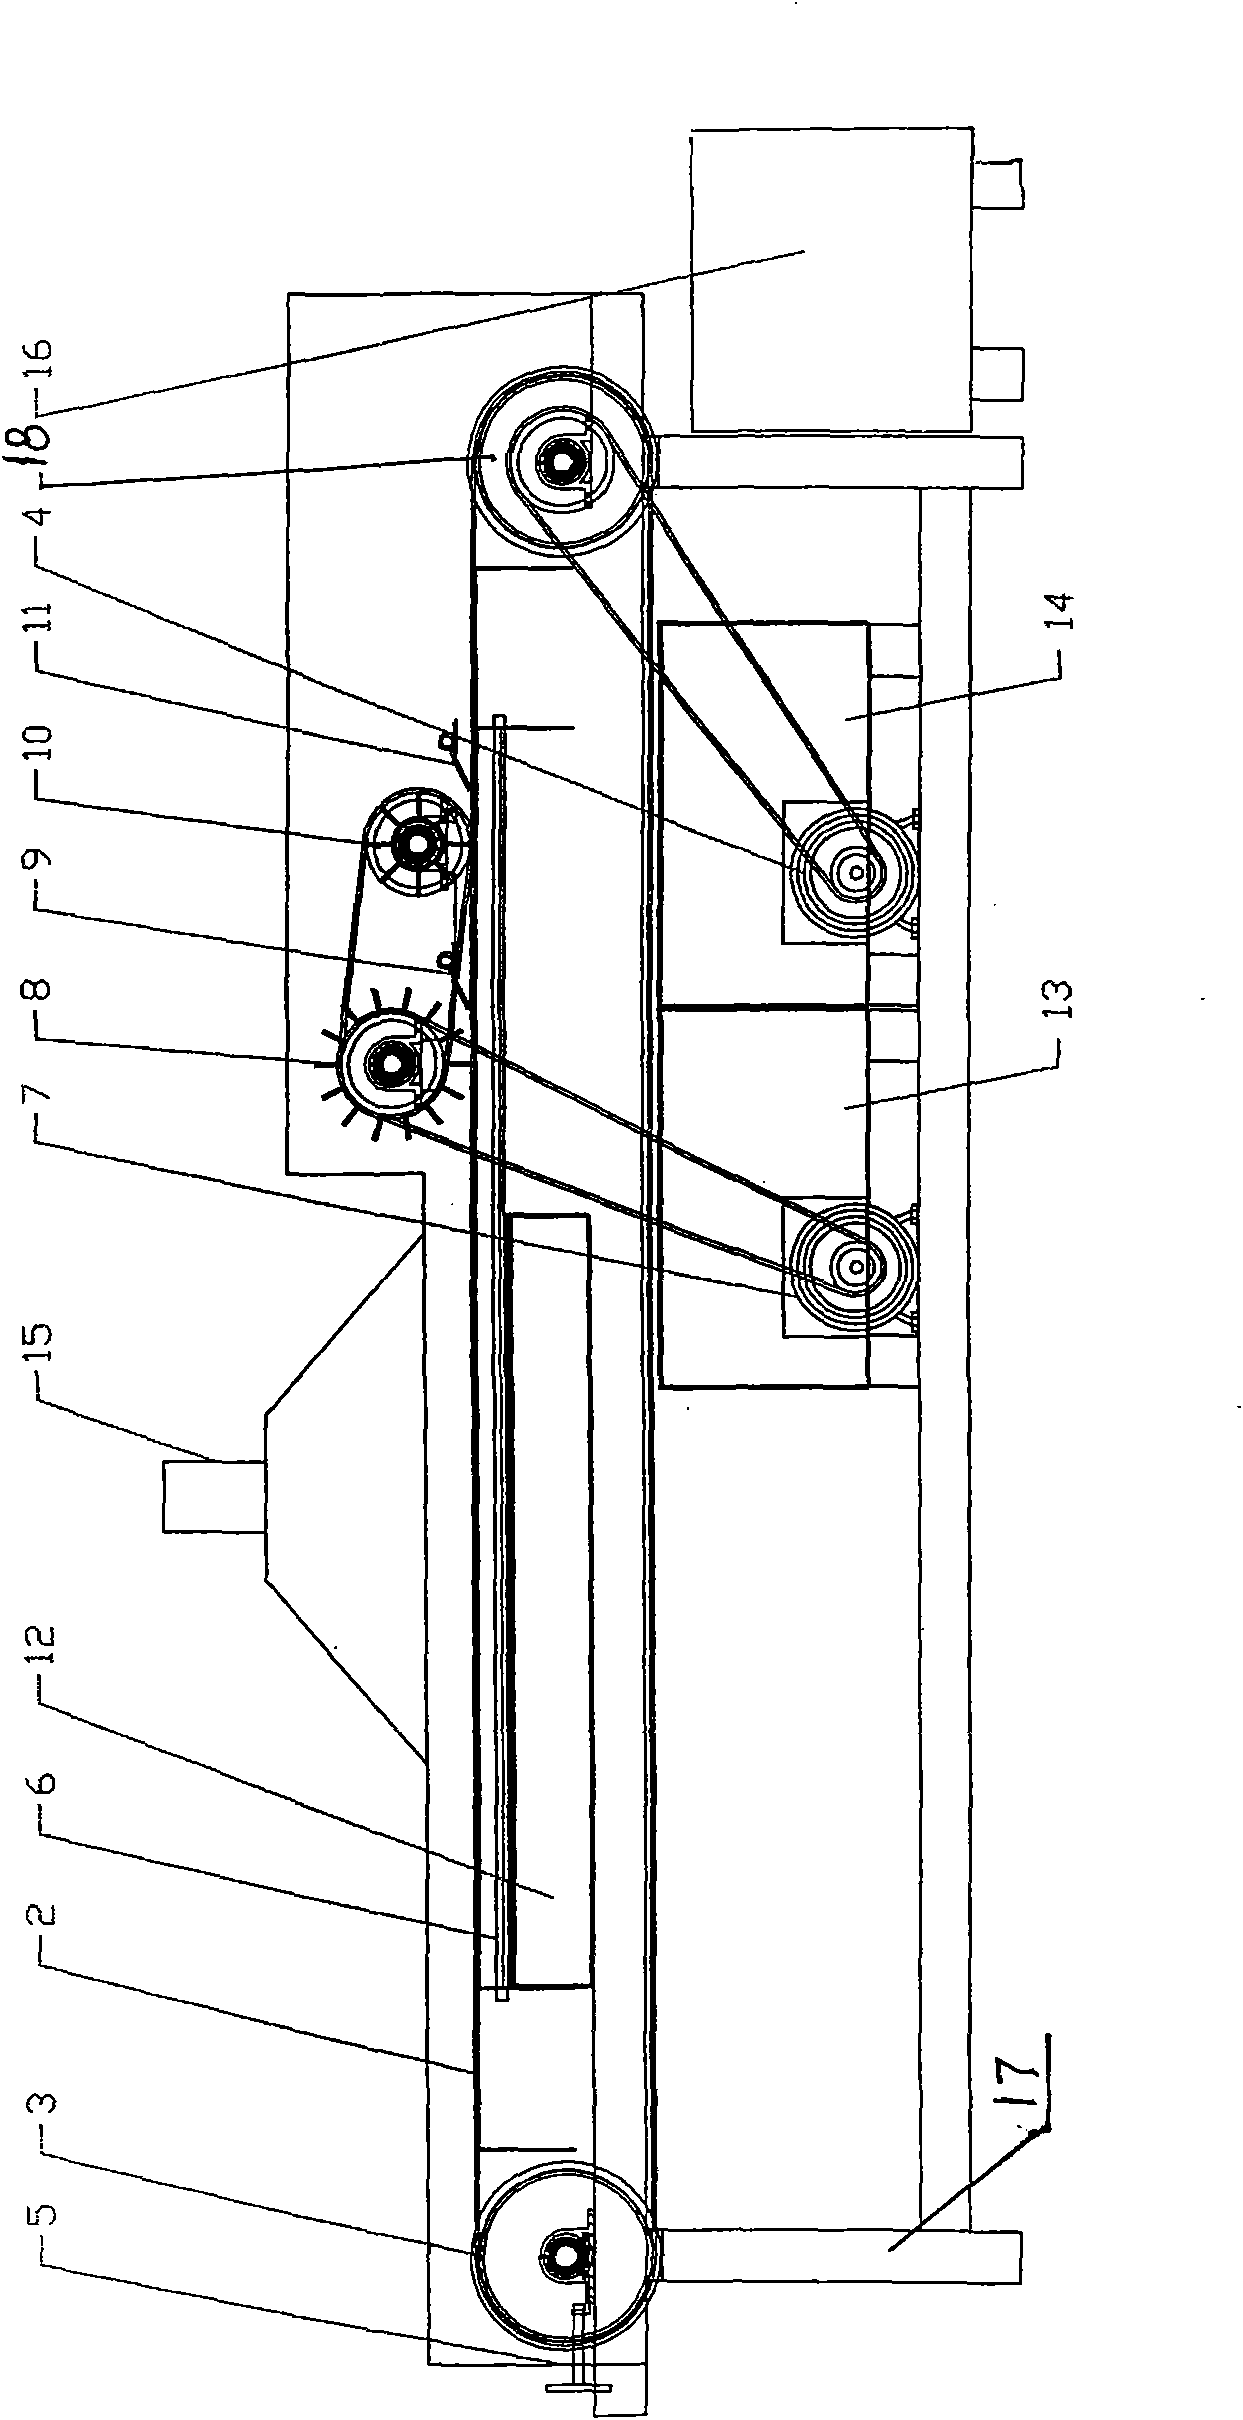 Method and device for disassembling electronic components from waste printed circuit boards and recovering soldering tin